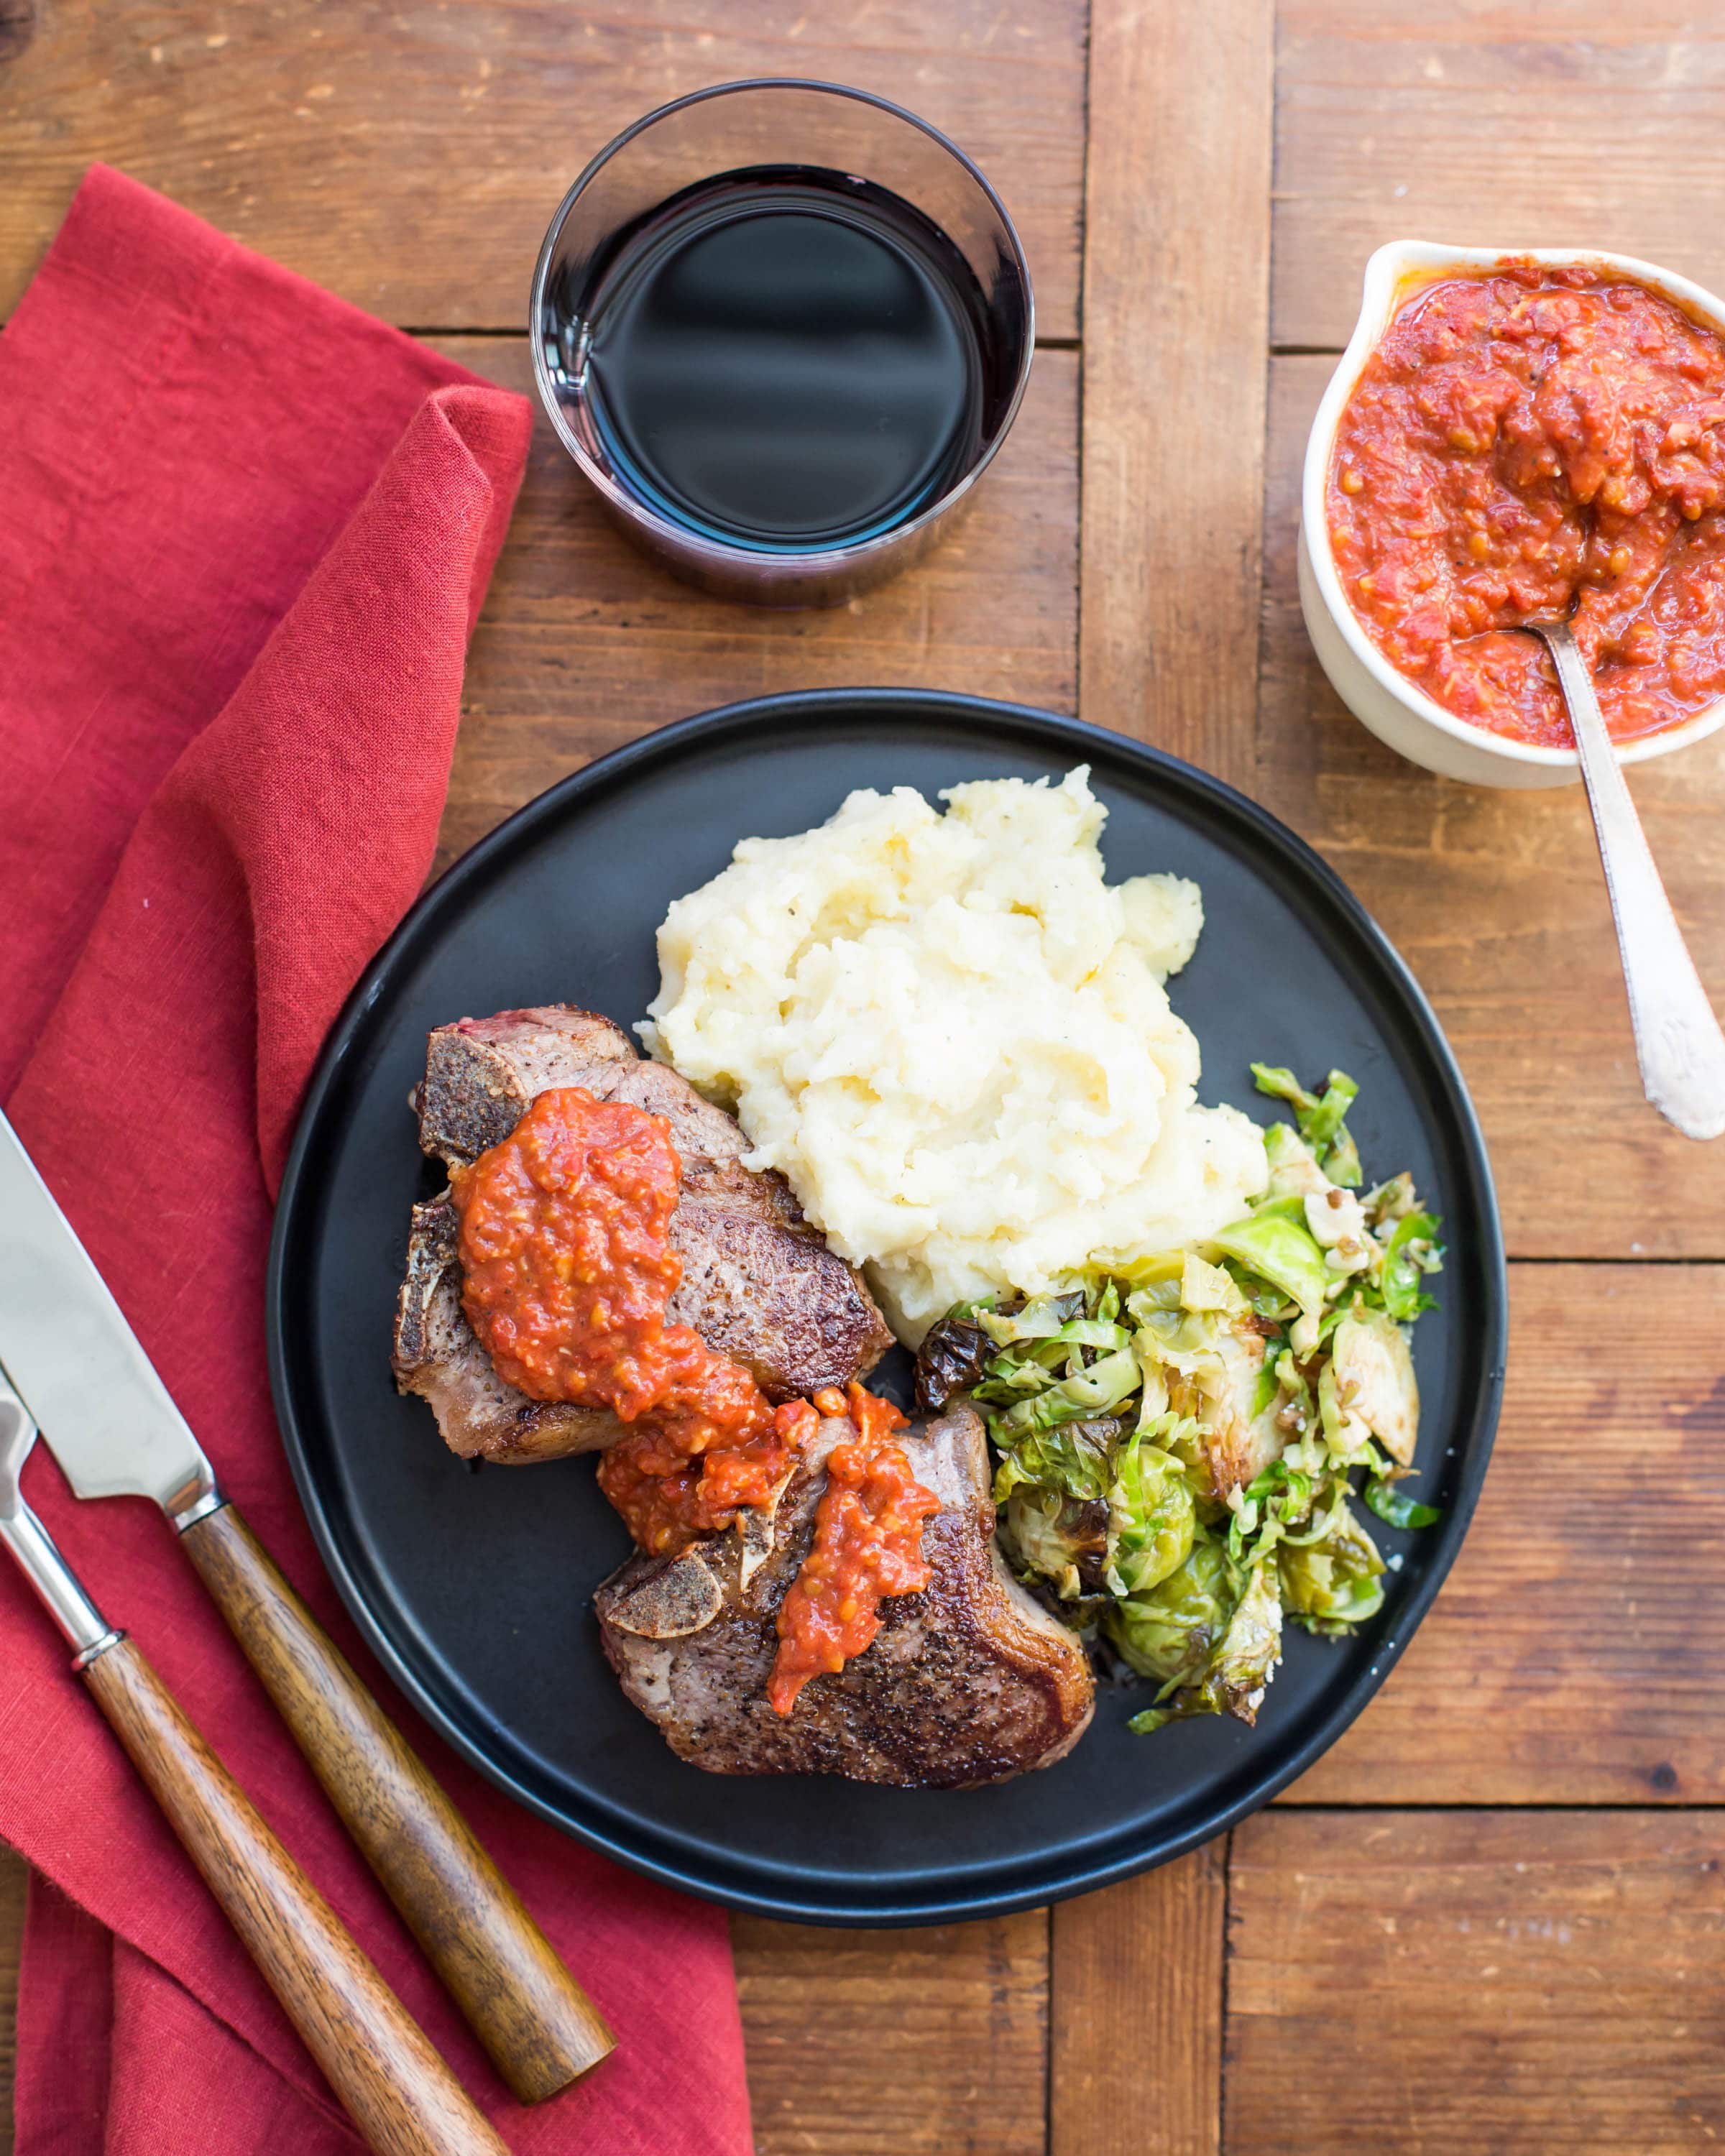 Loin Lamb Chops with Roasted Tomato and Garlic Sauce with mashed potatoes and brussels sprouts.